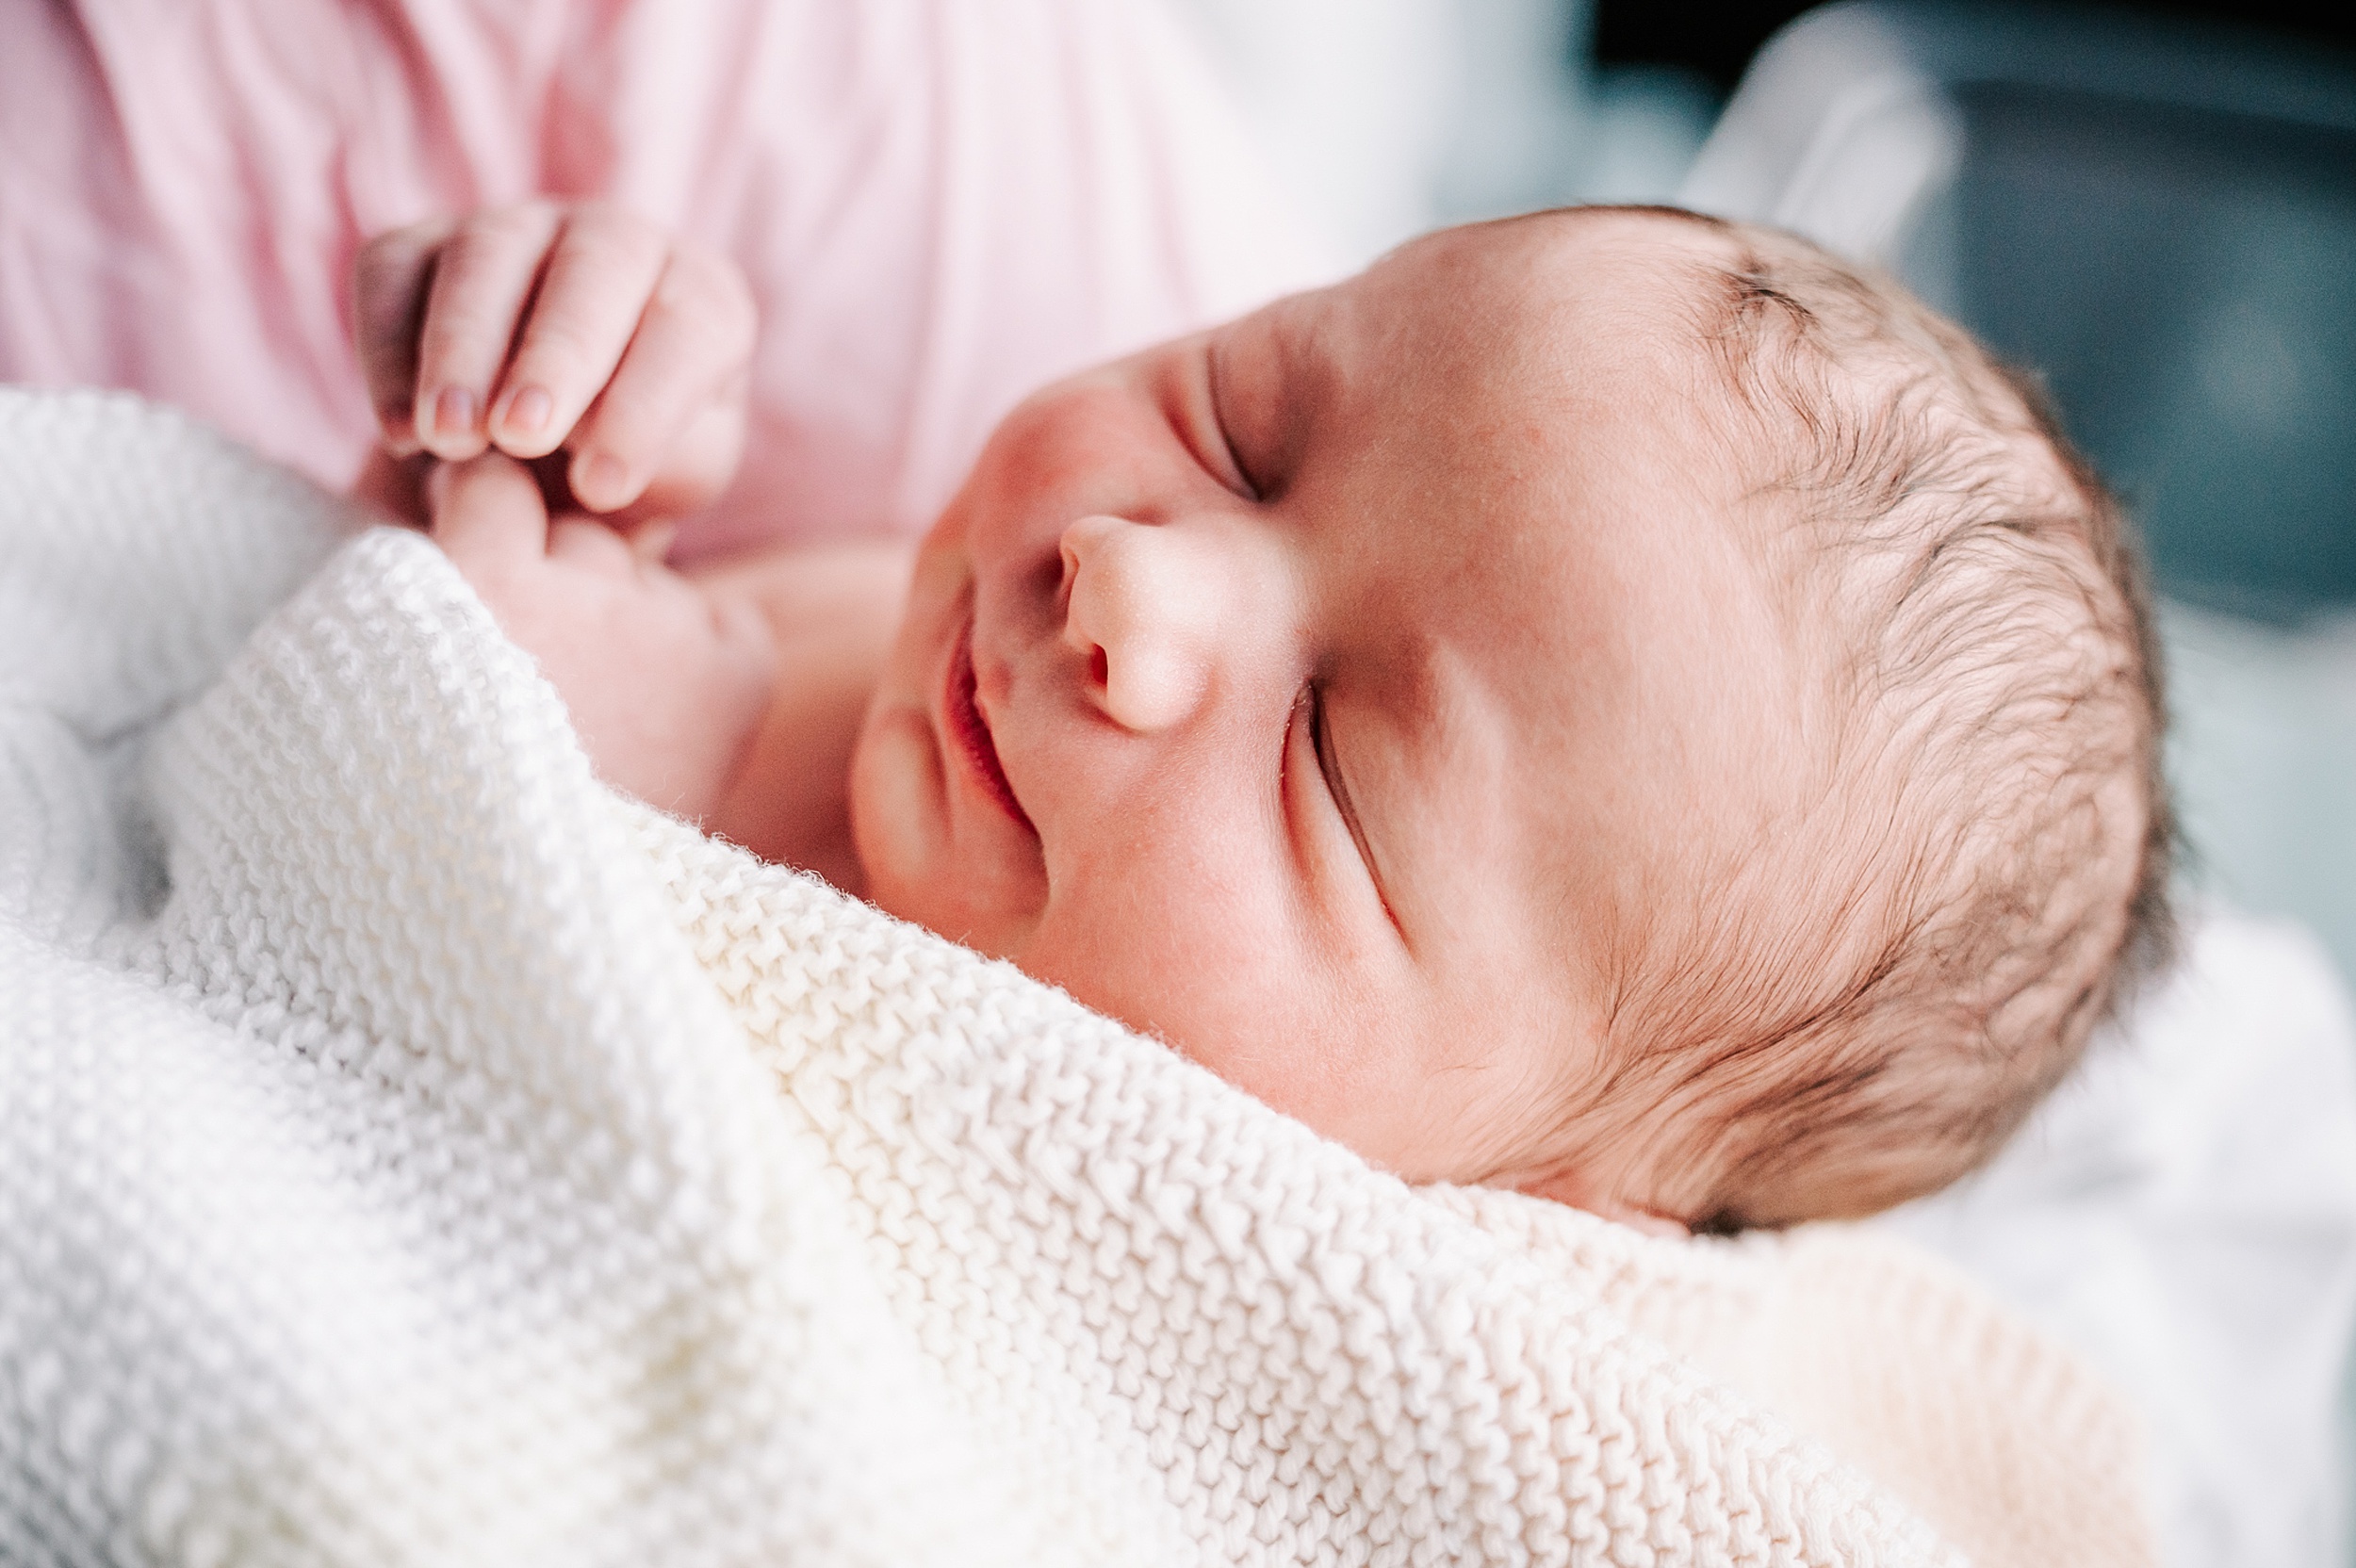 Details of a sleeping newborn baby with a white knit blanket